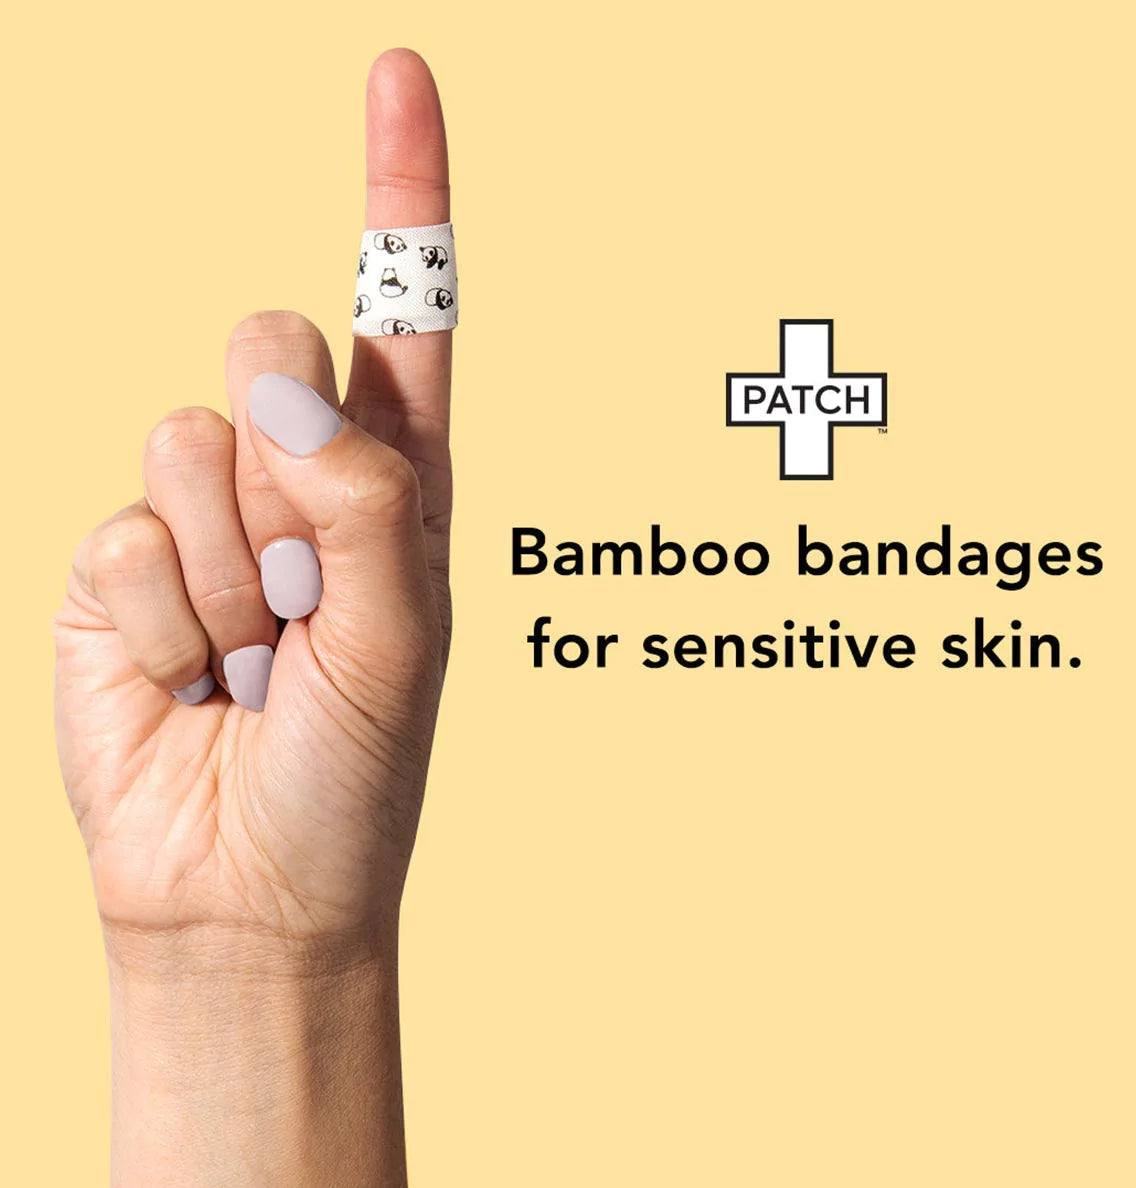 Patch - 100 Panda Bamboo Bandages Value Pack